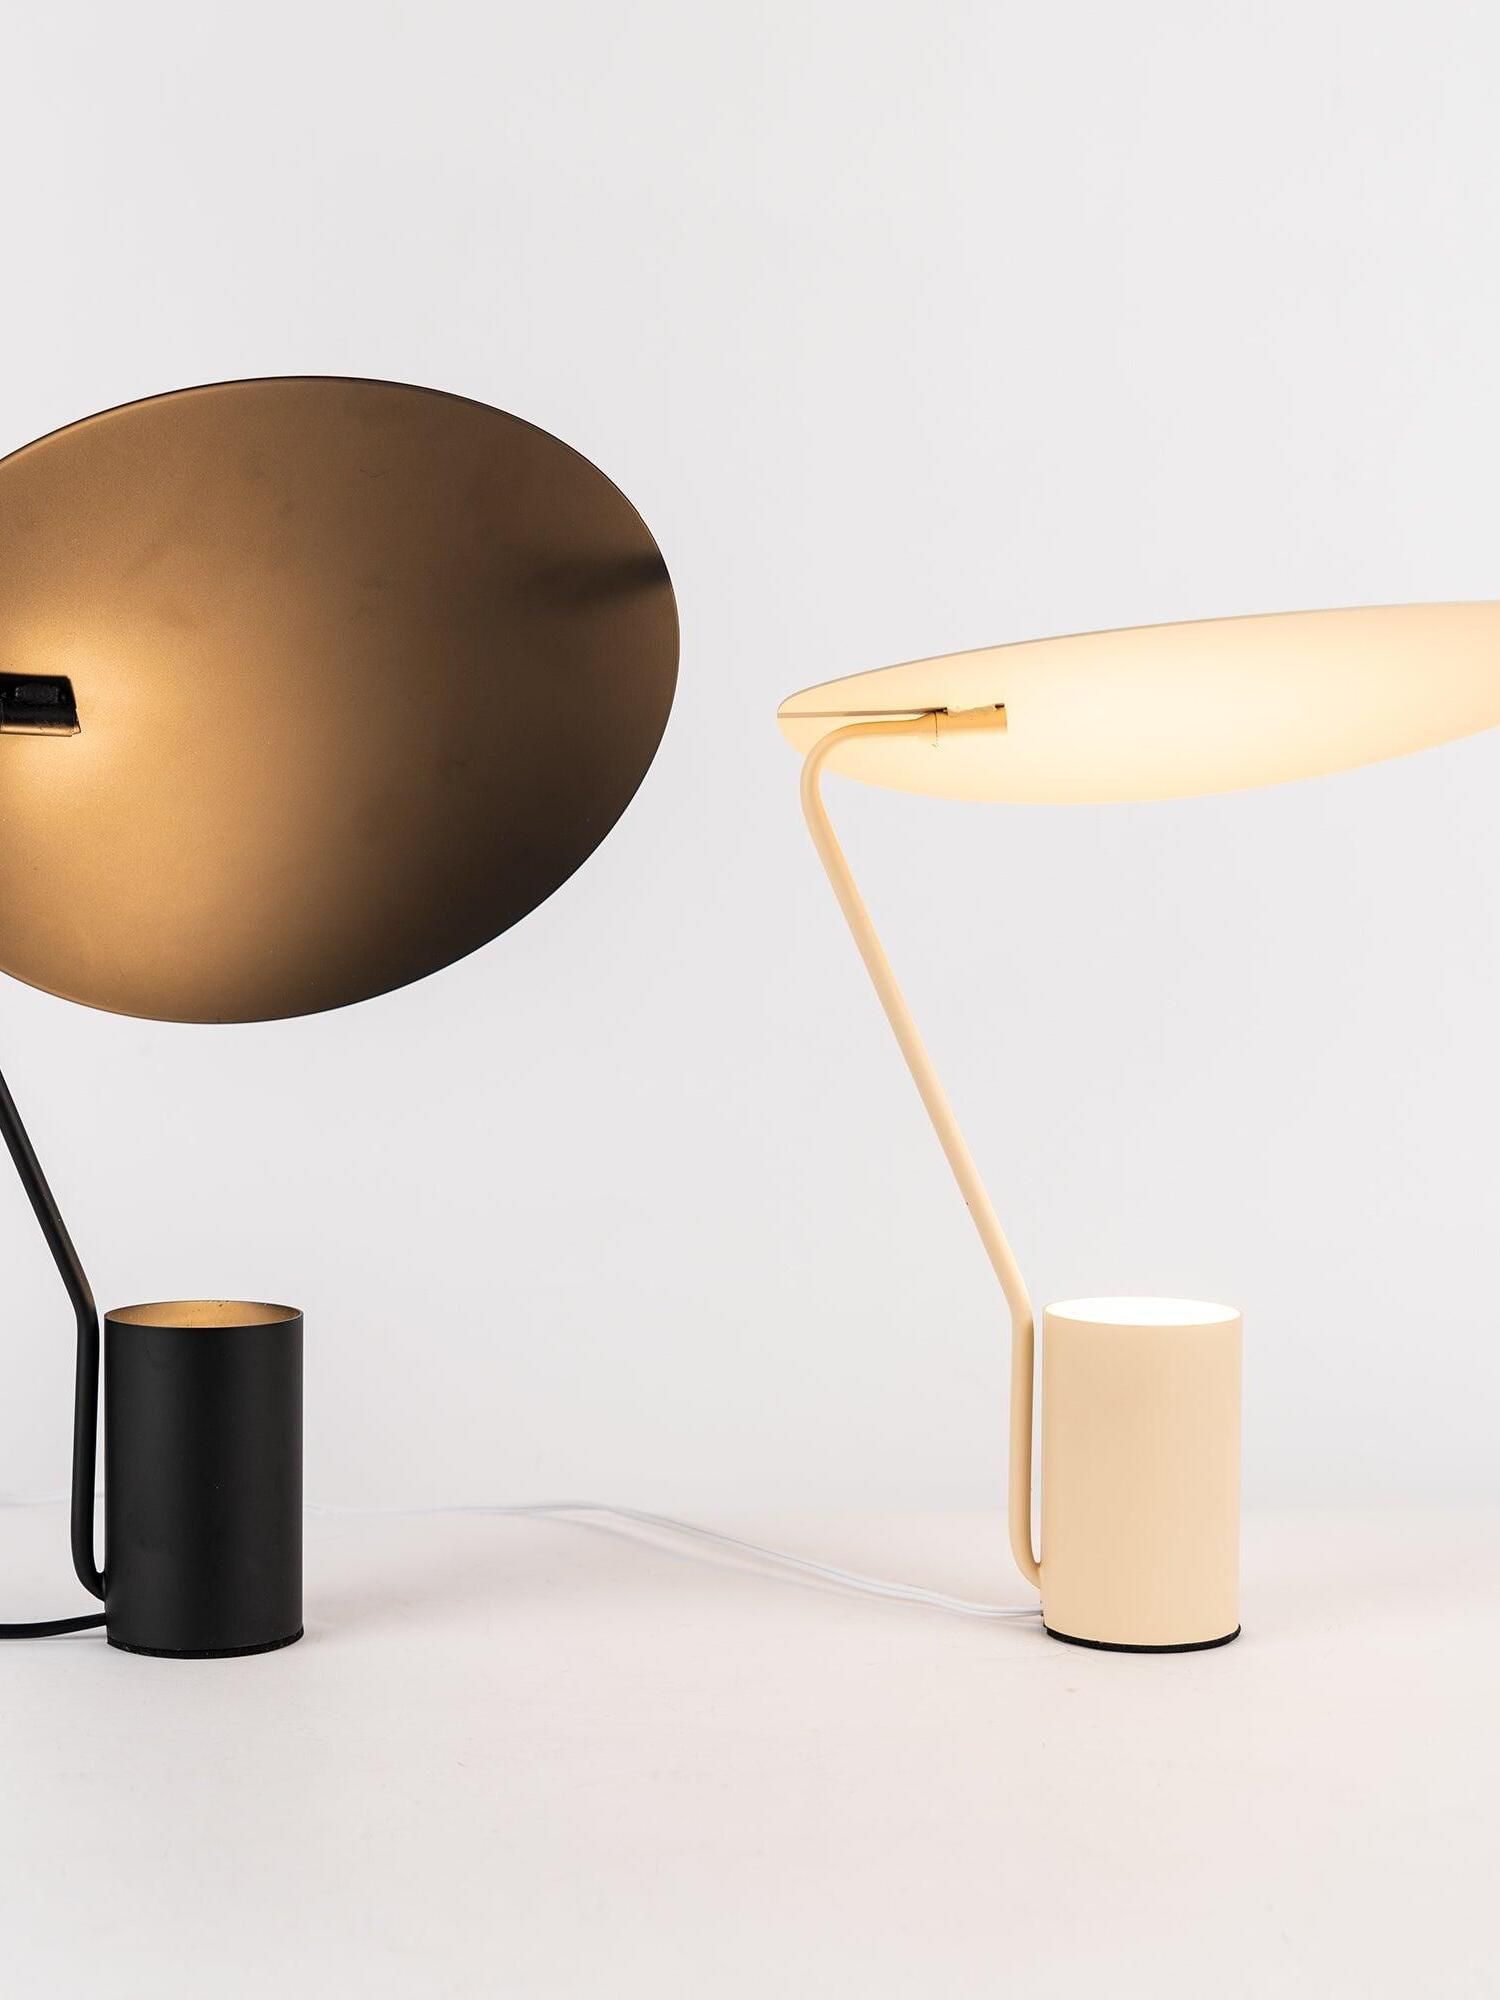 Narrow Lamp Table : The Best Narrow Lamp Table Options Available Today